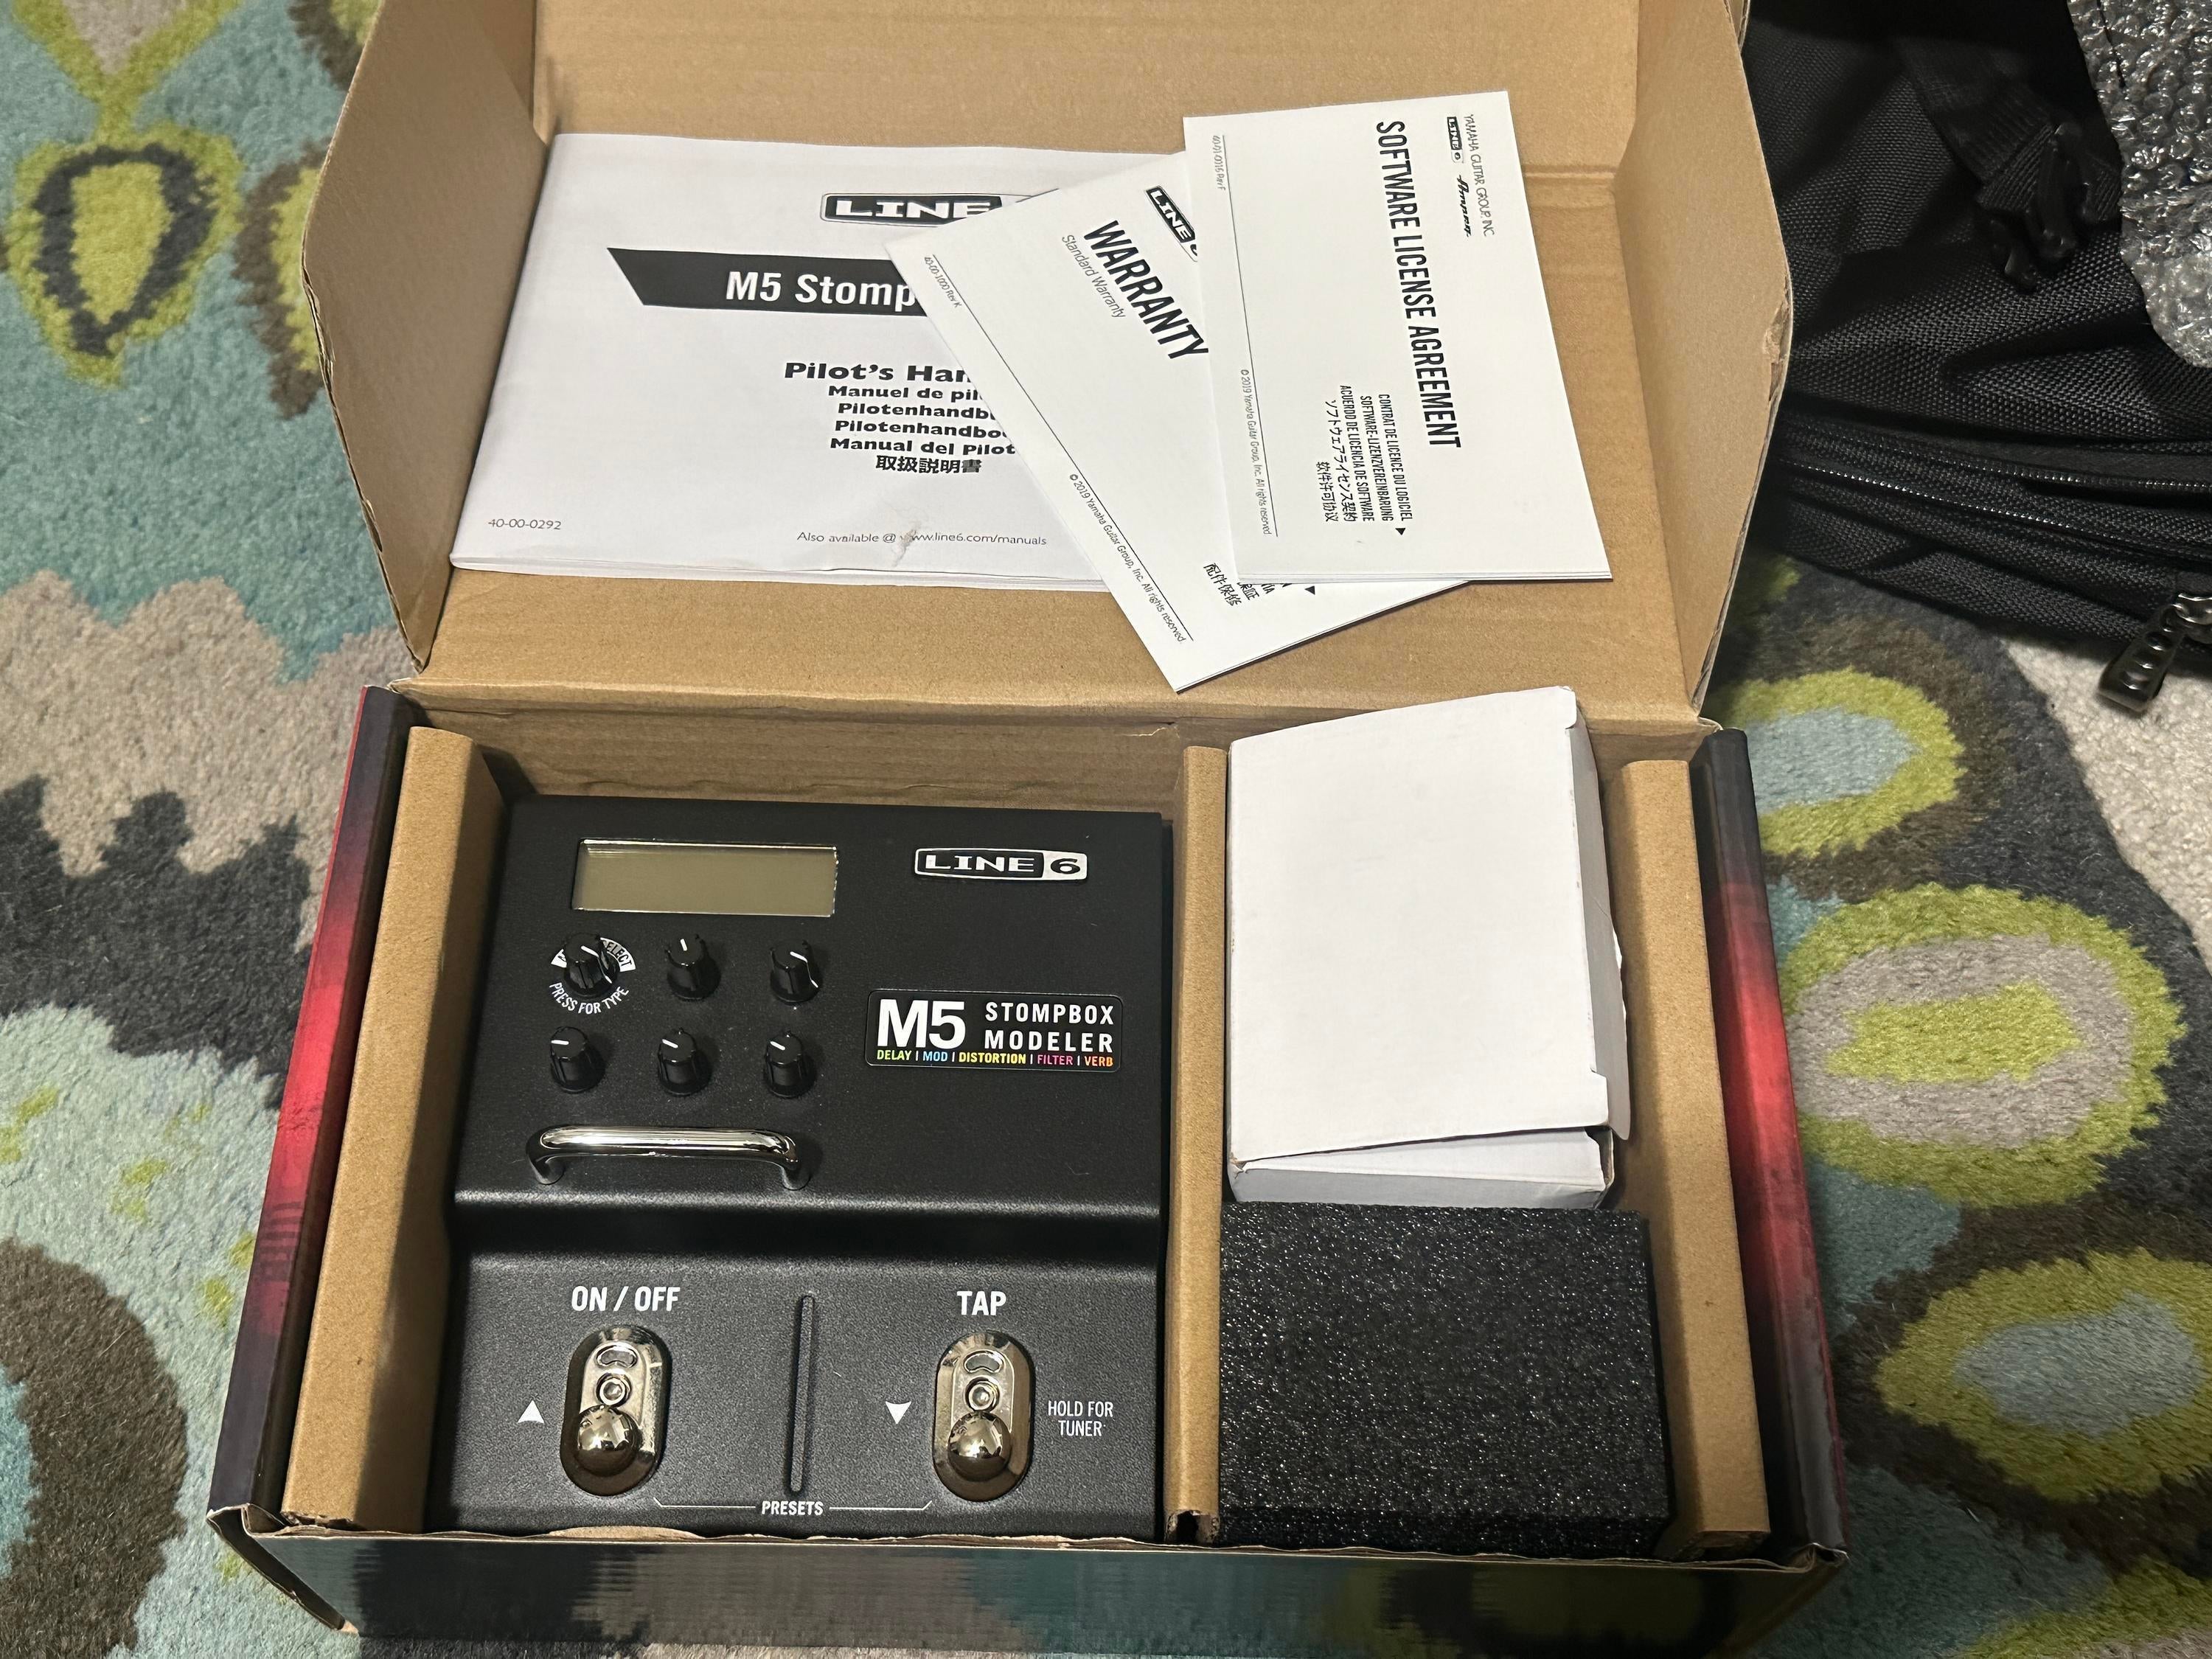 Used Line 6 M5 Stompbox Modeler Pedal - Sweetwater's Gear Exchange